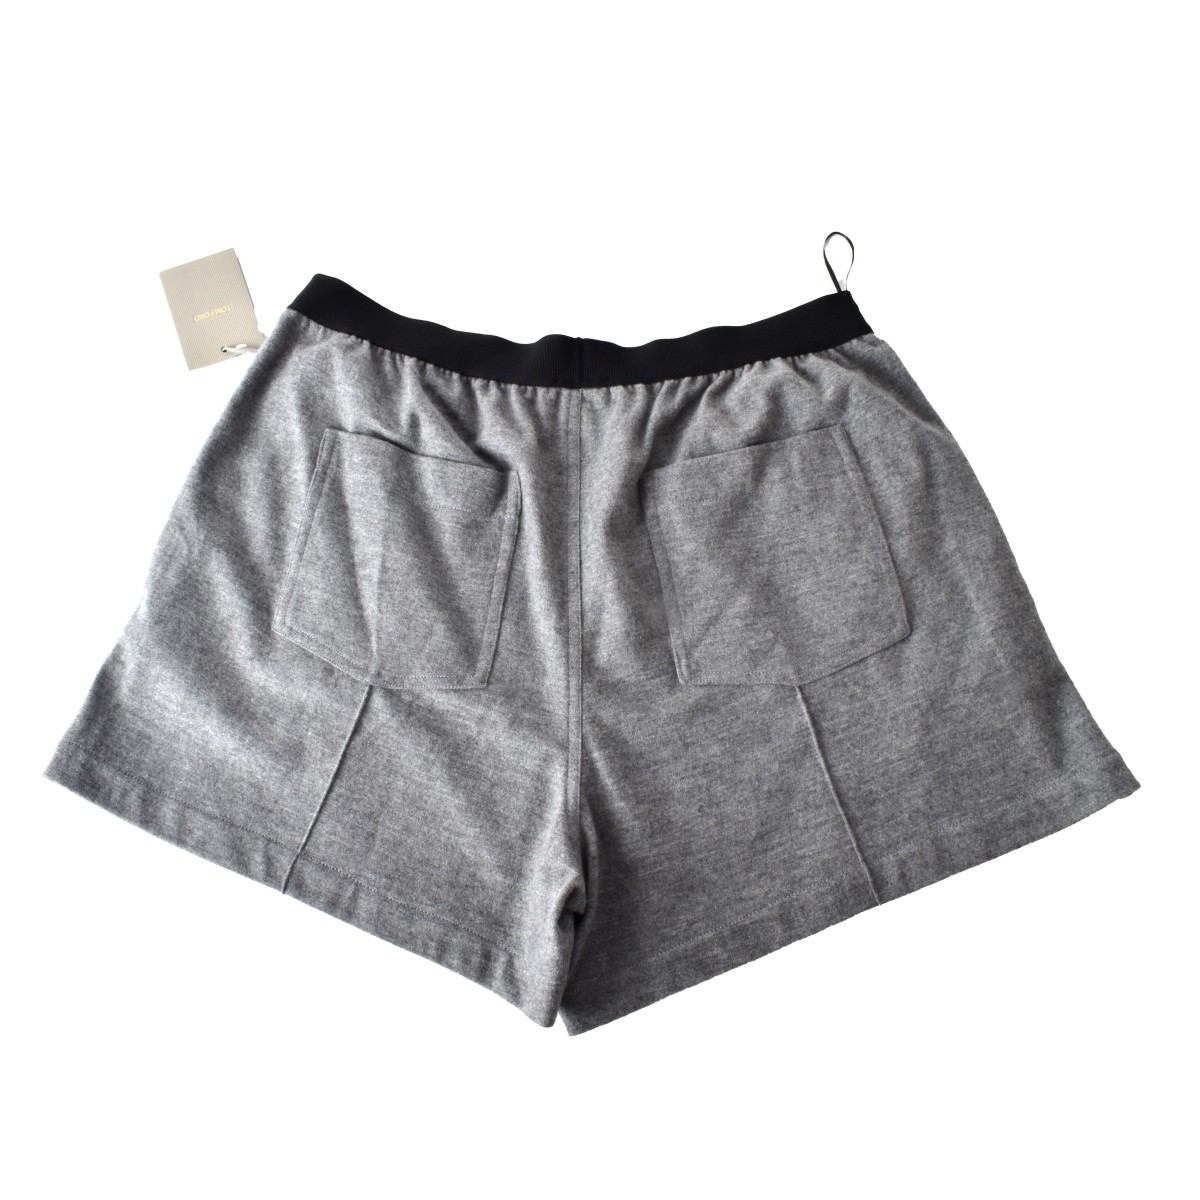 Tom Ford Grey and White Shorts